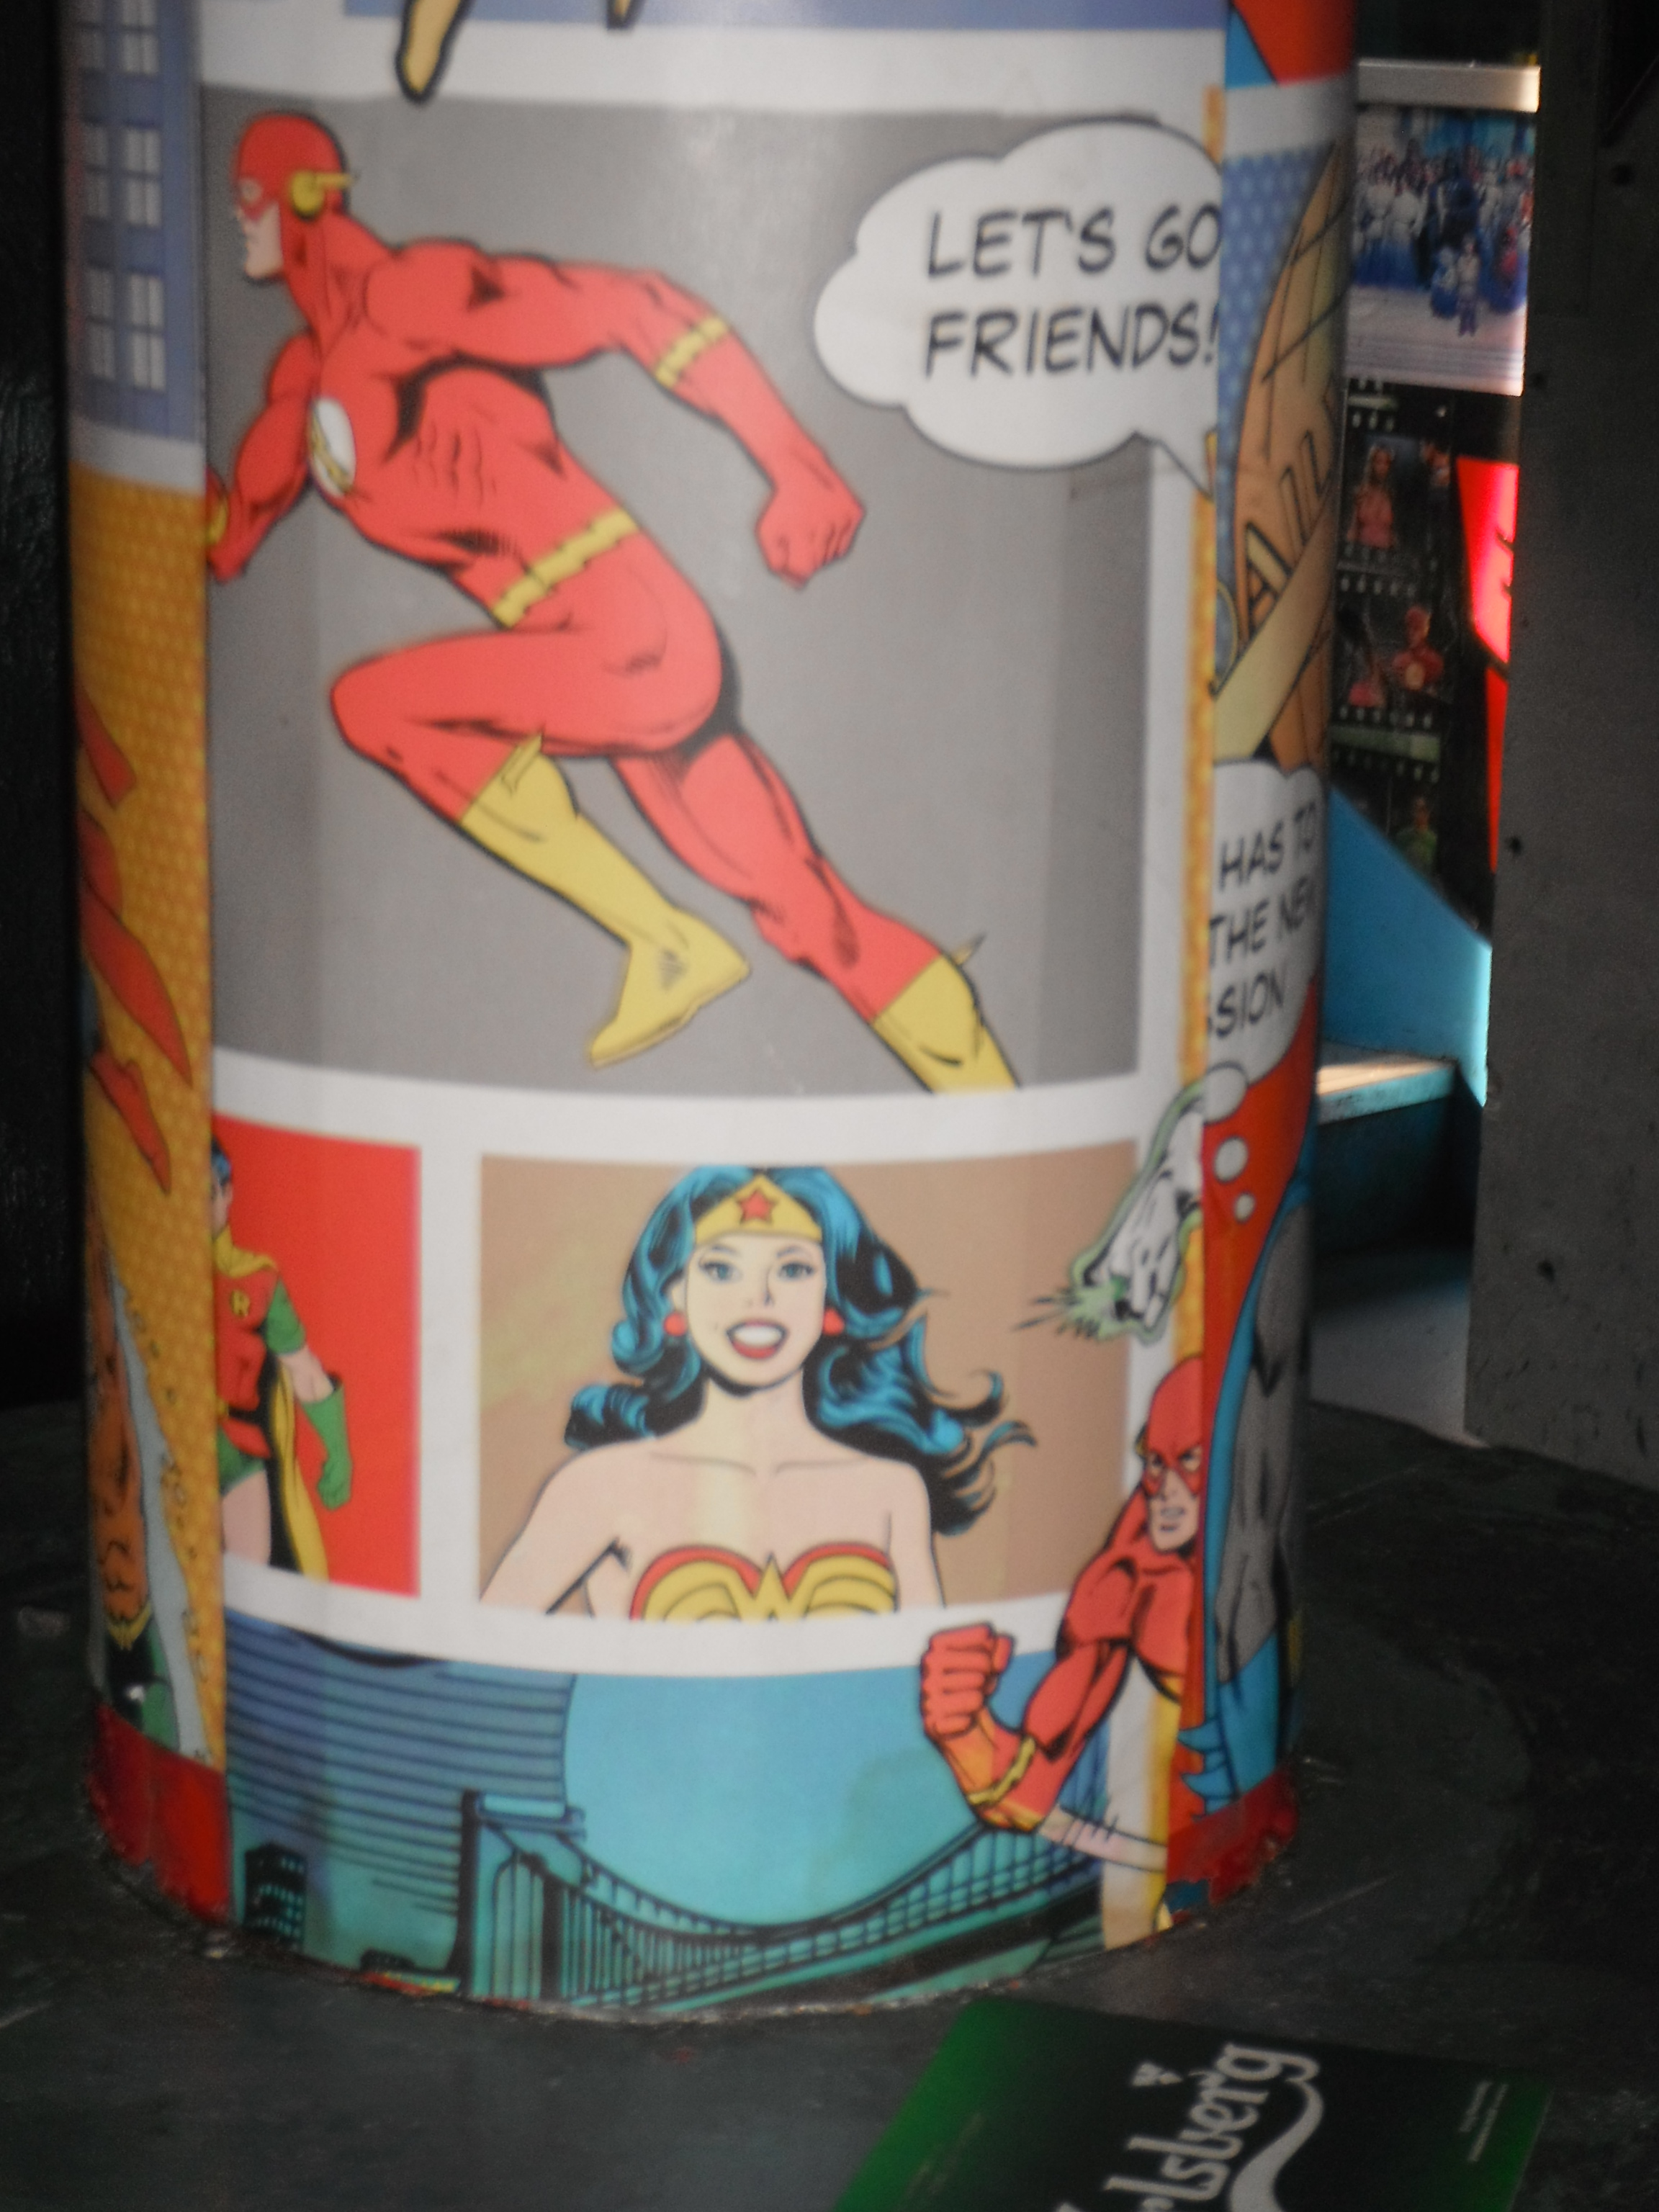 Photo taken by me – Flash And Wonder Woman comic covers – FAB Café, Manchester